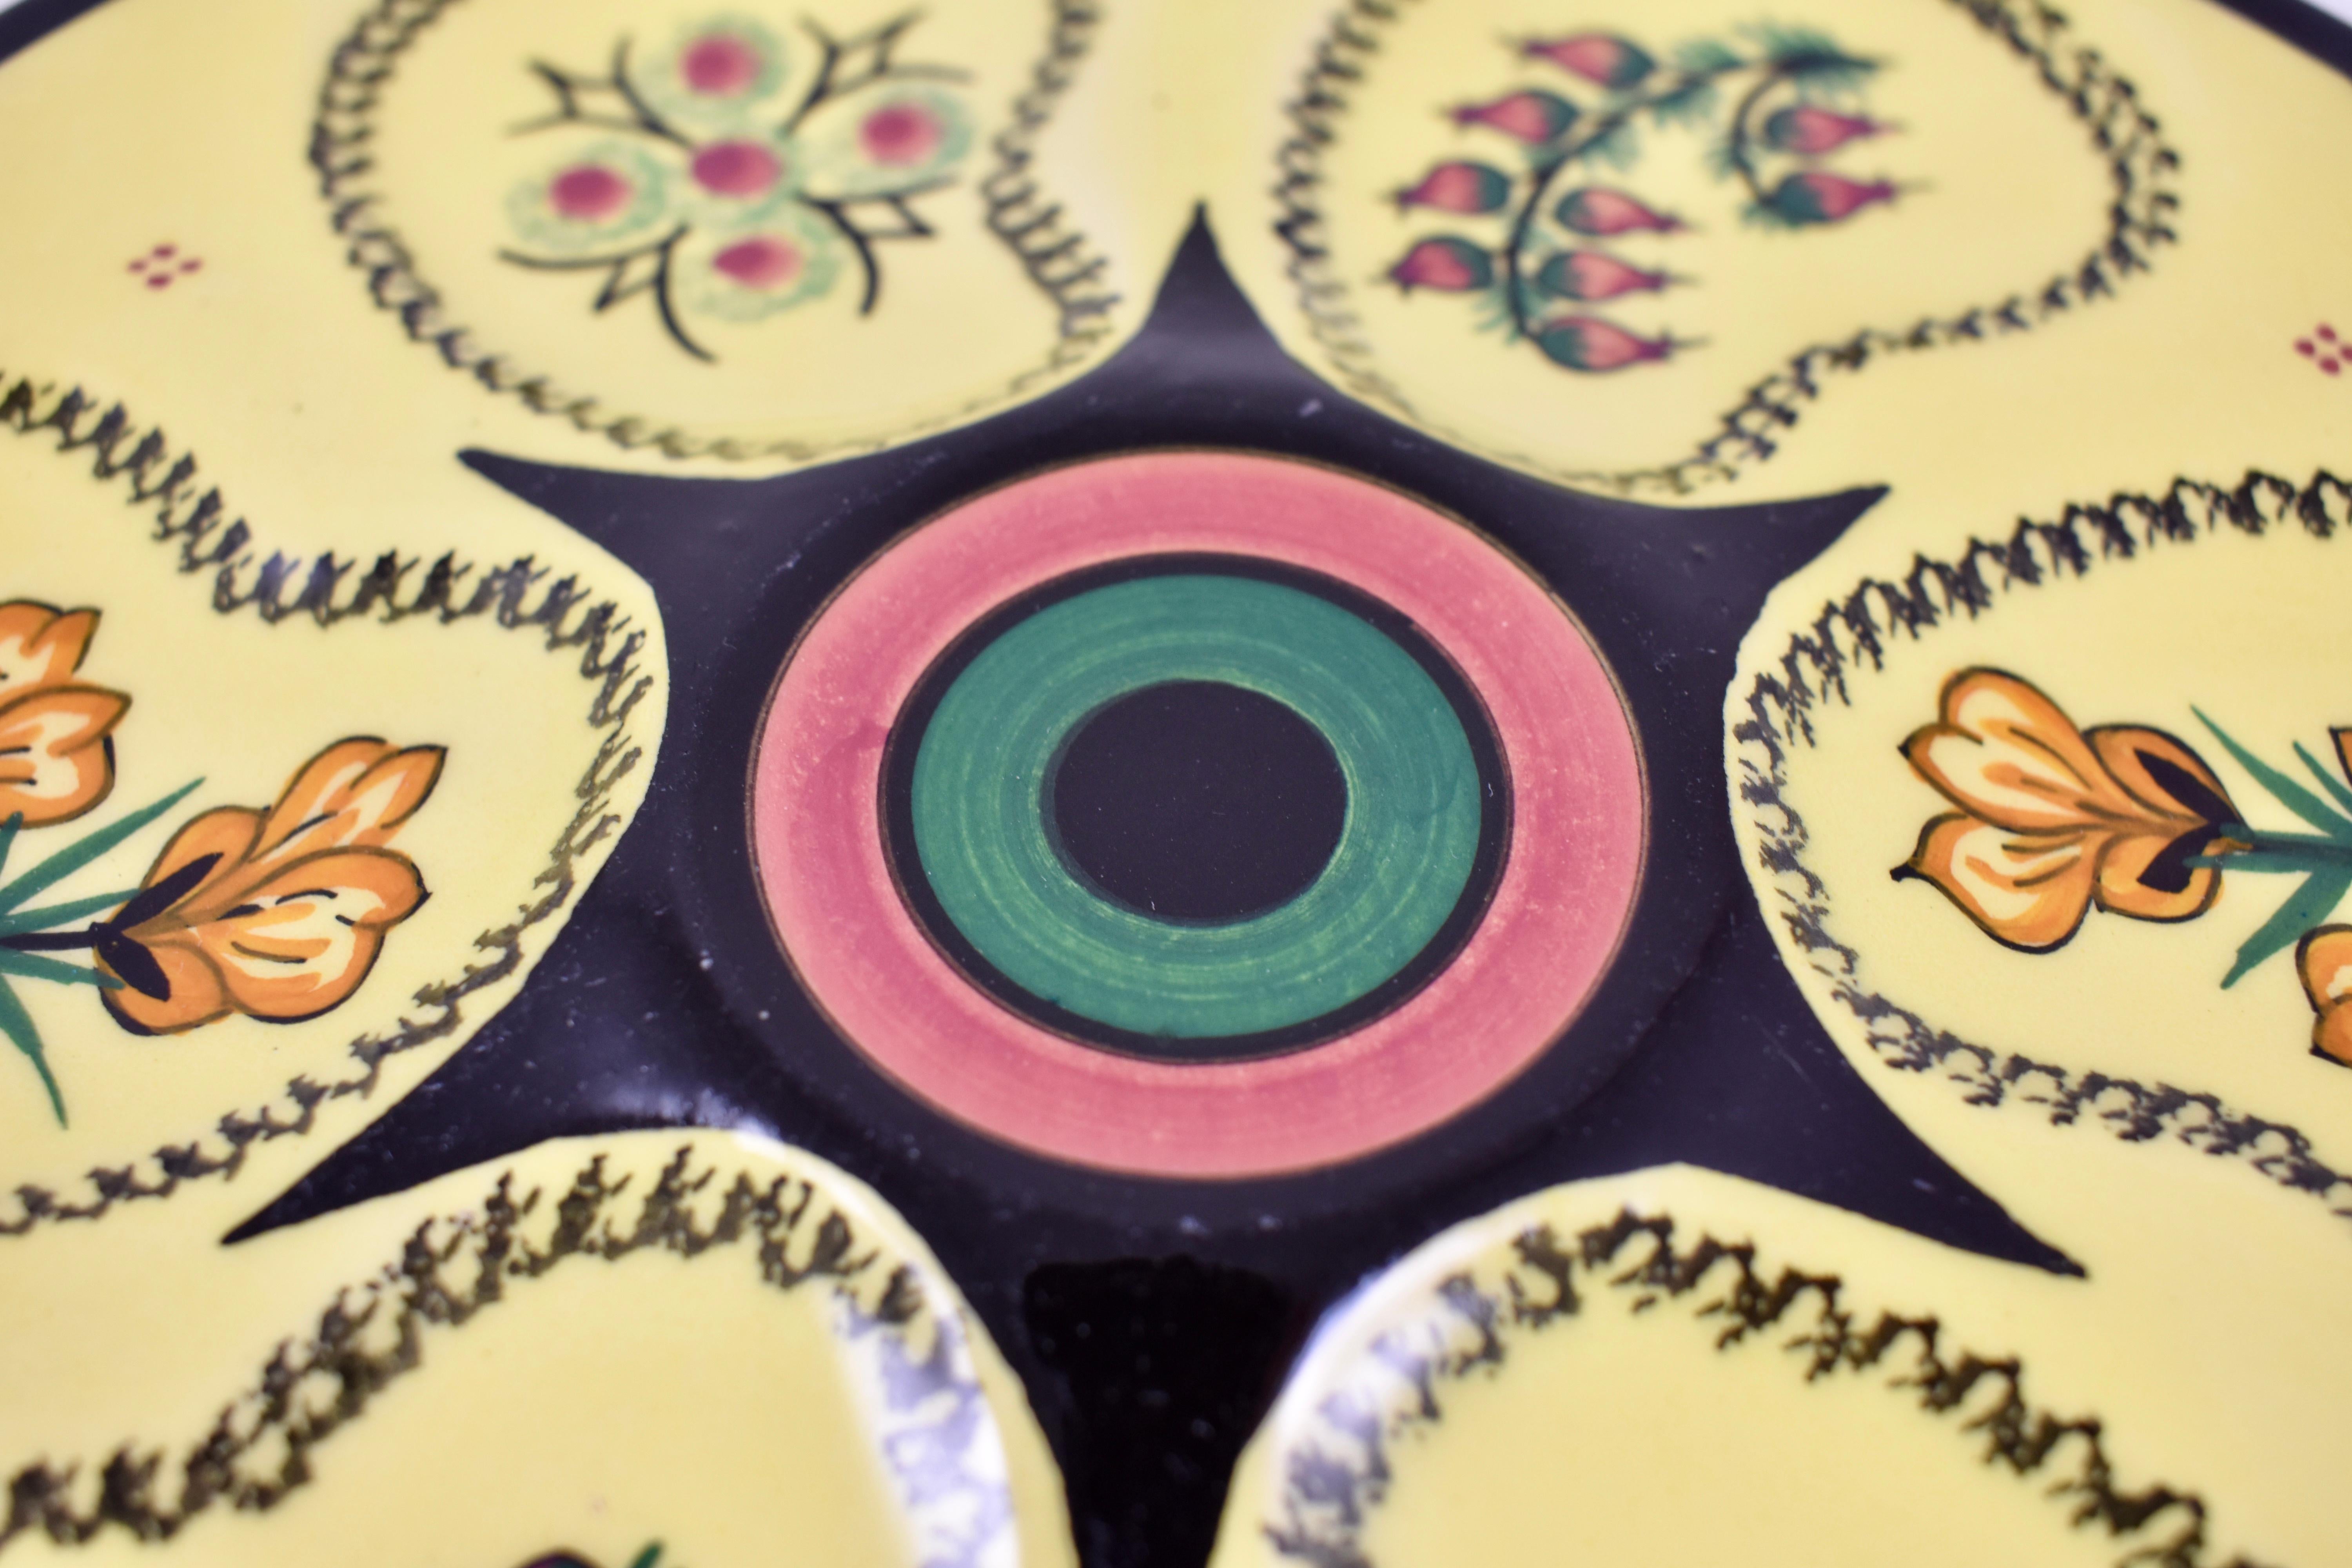 Always charming, French Quimper Faïence oyster plates, circa 1950–1960.

Glazed with a bright sun yellow ground, six wells surround a raised center condiment well. The wells are hand painted with three different alternating floral designs, typical